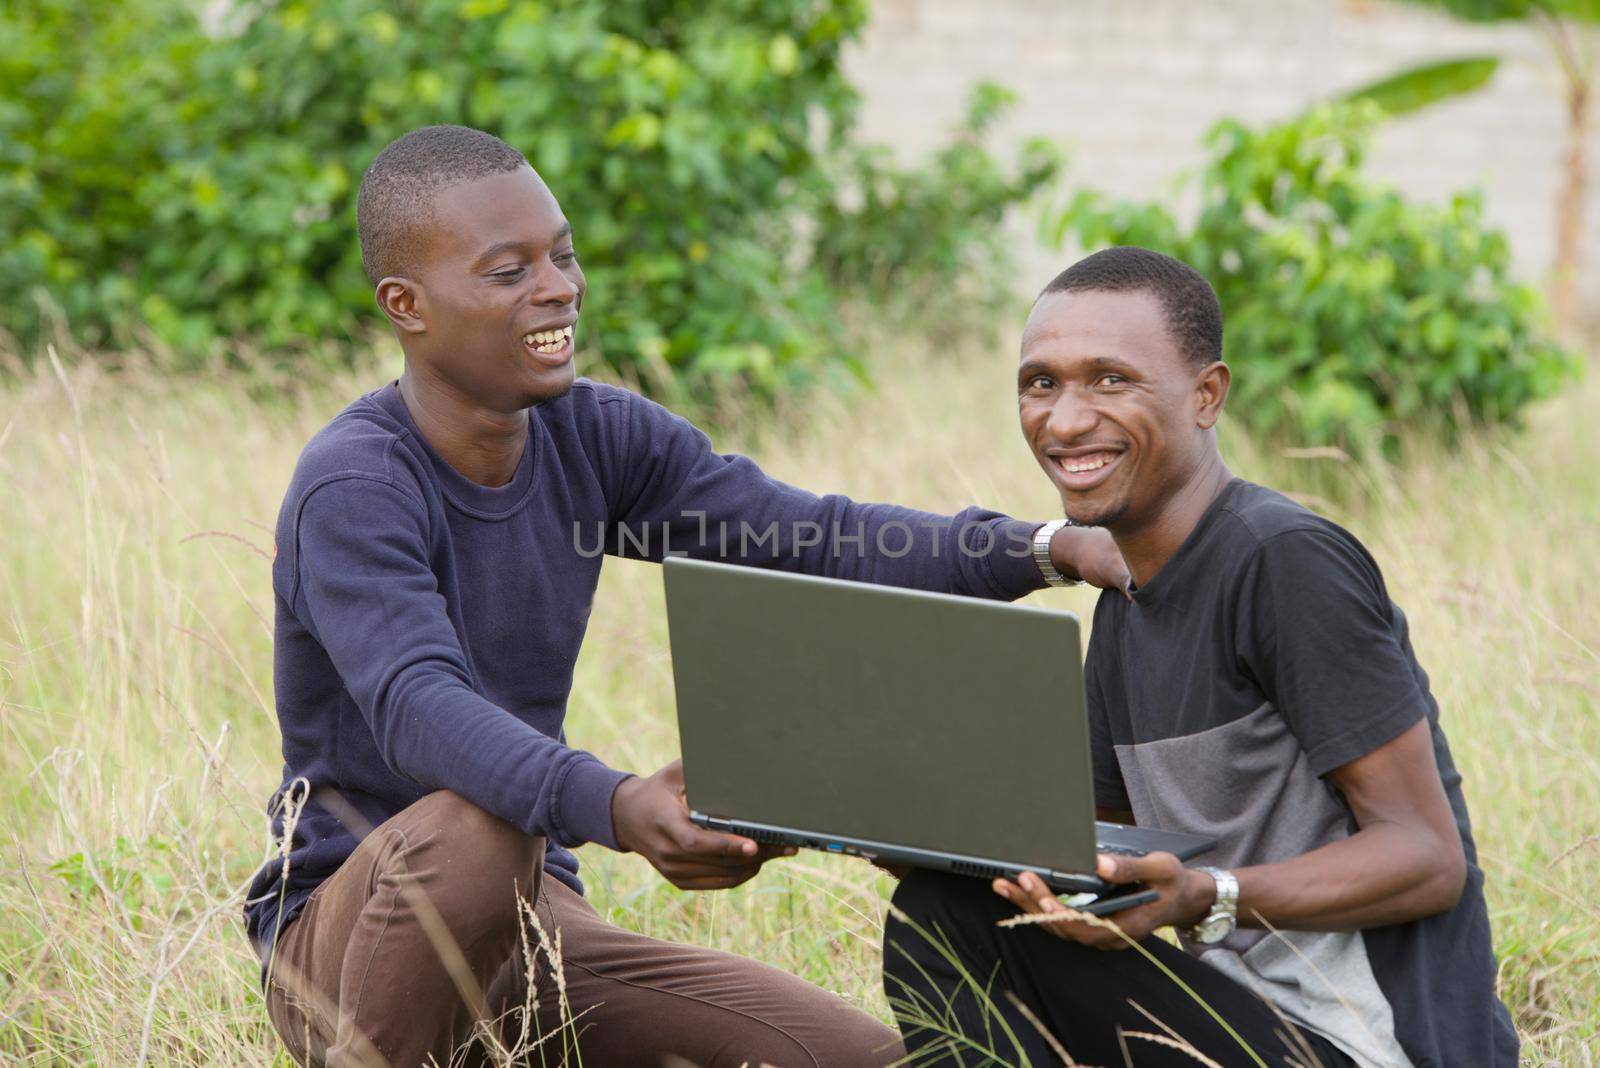 young people squatting in herbs with laptop, smiling.